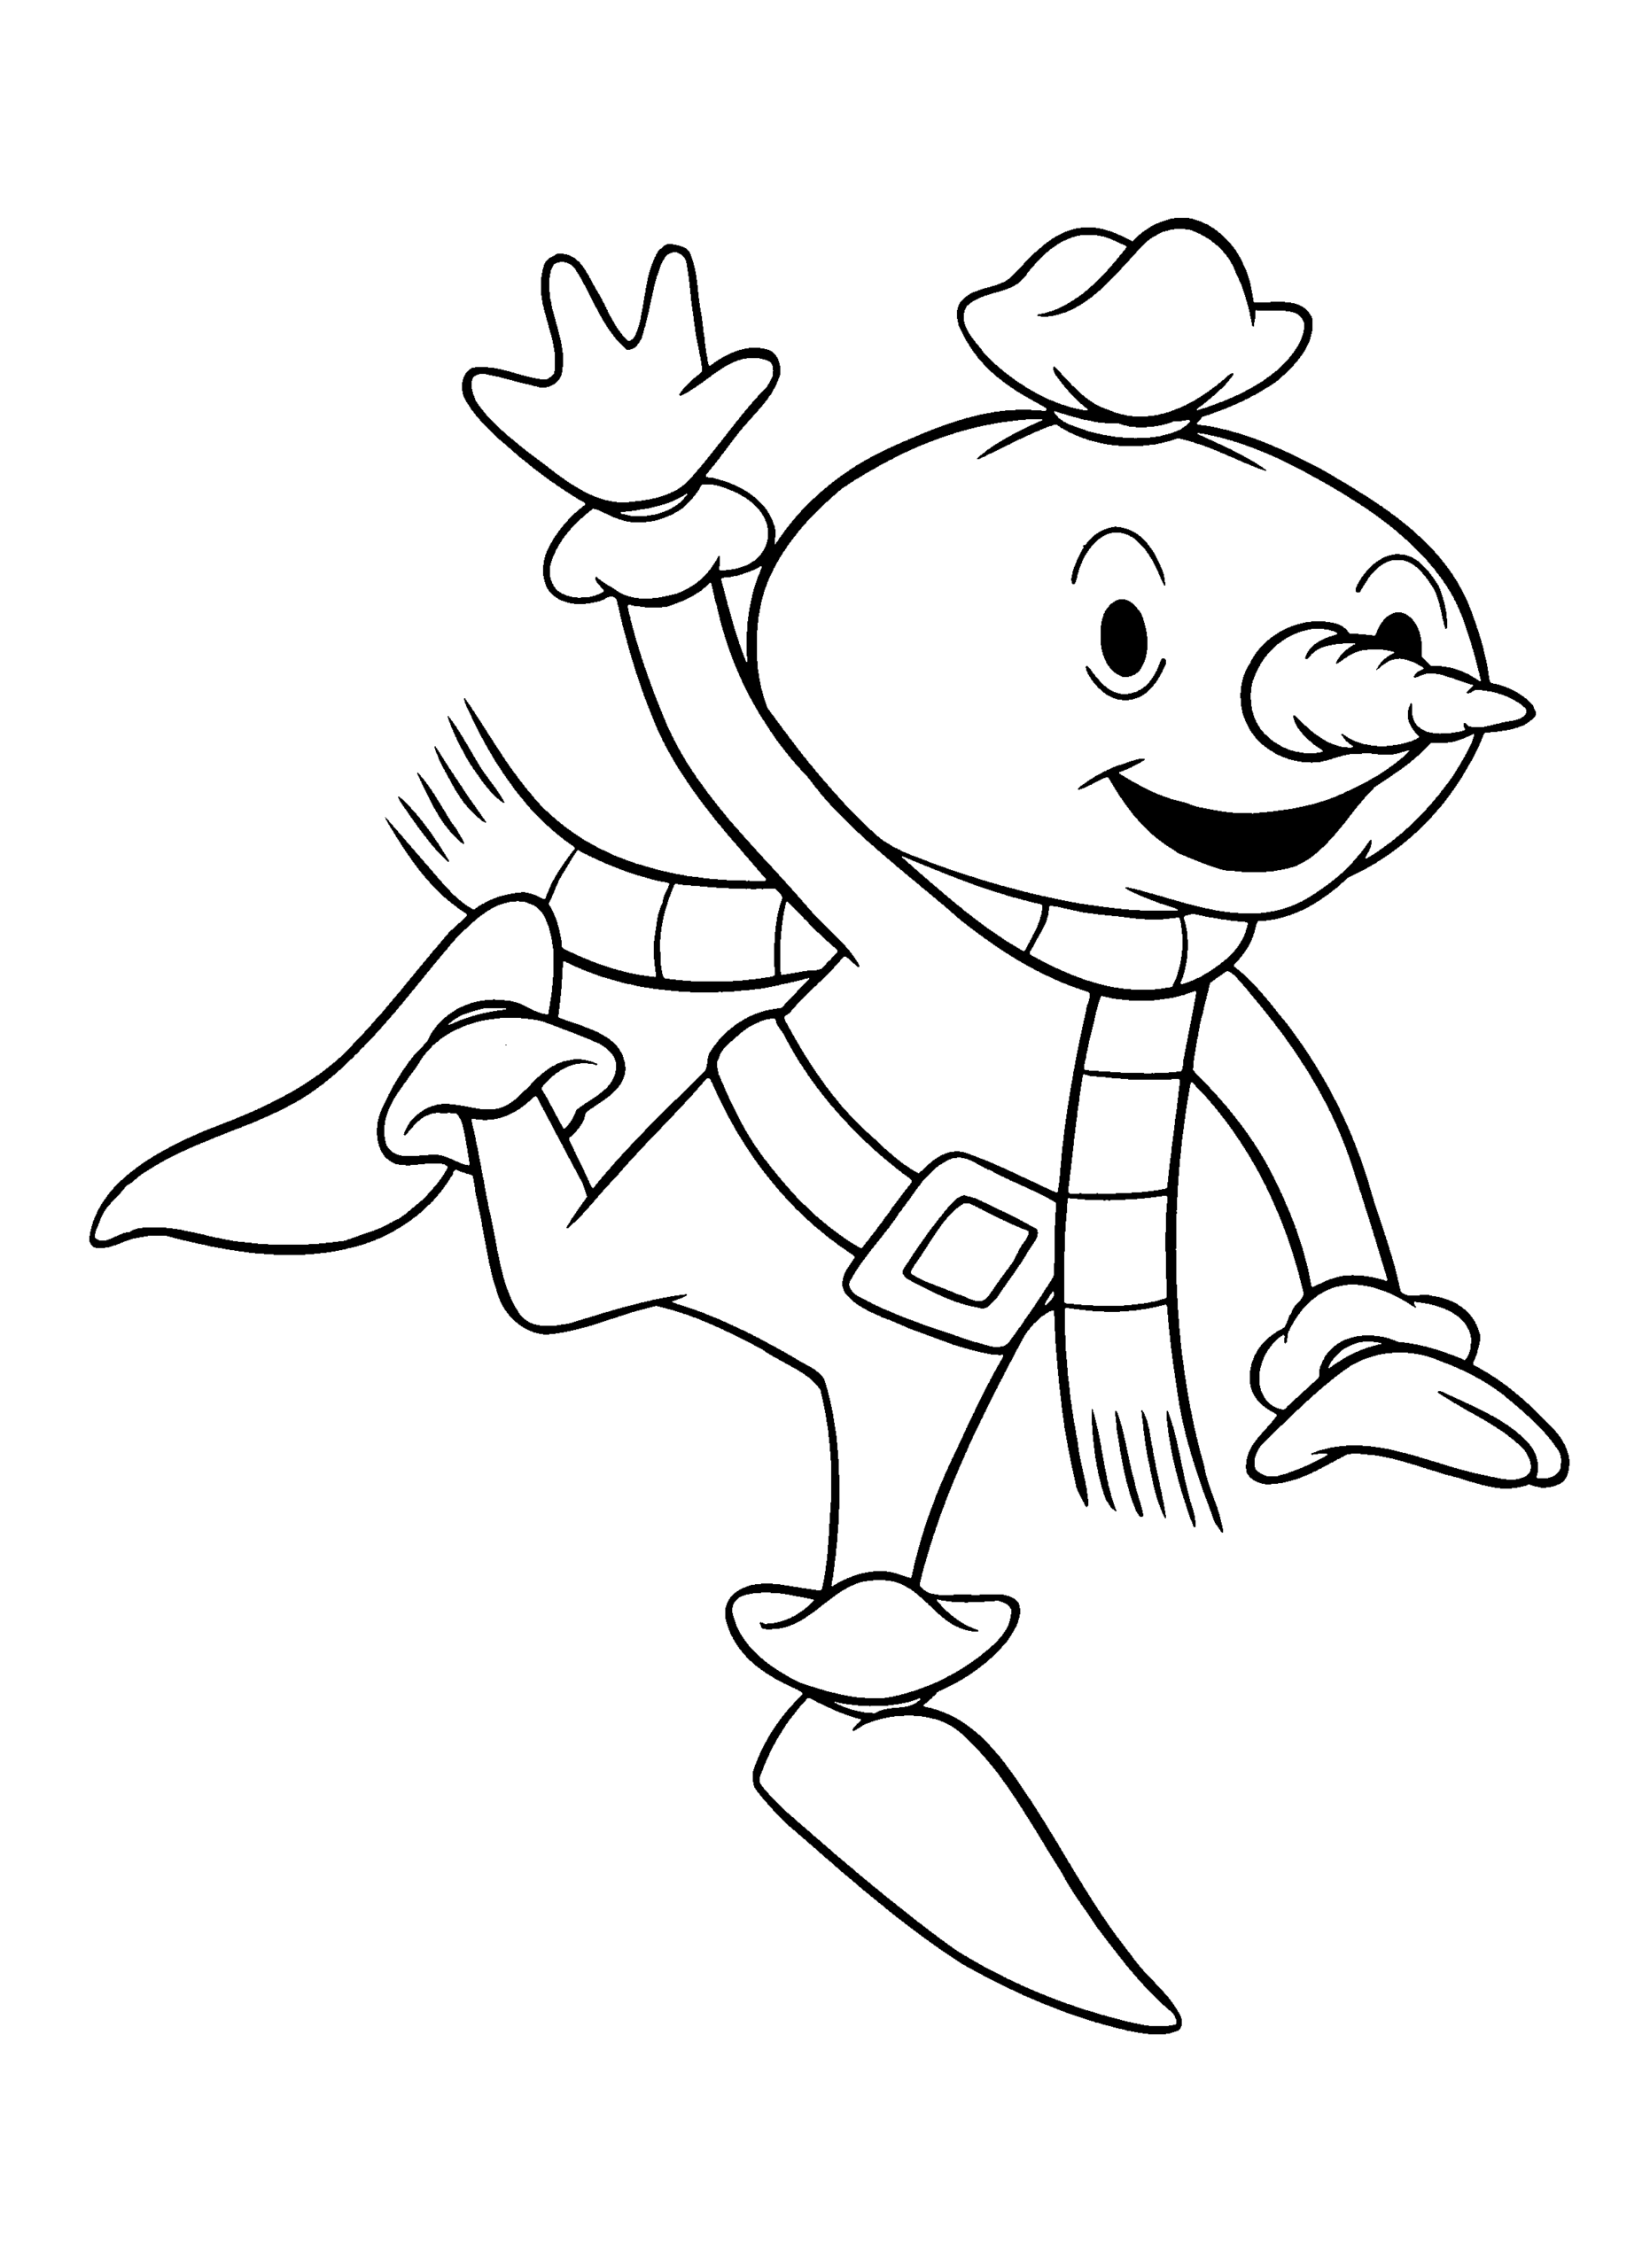 Bob the Builder Coloring Pages TV Film bob the builder 30 Printable 2020 01049 Coloring4free